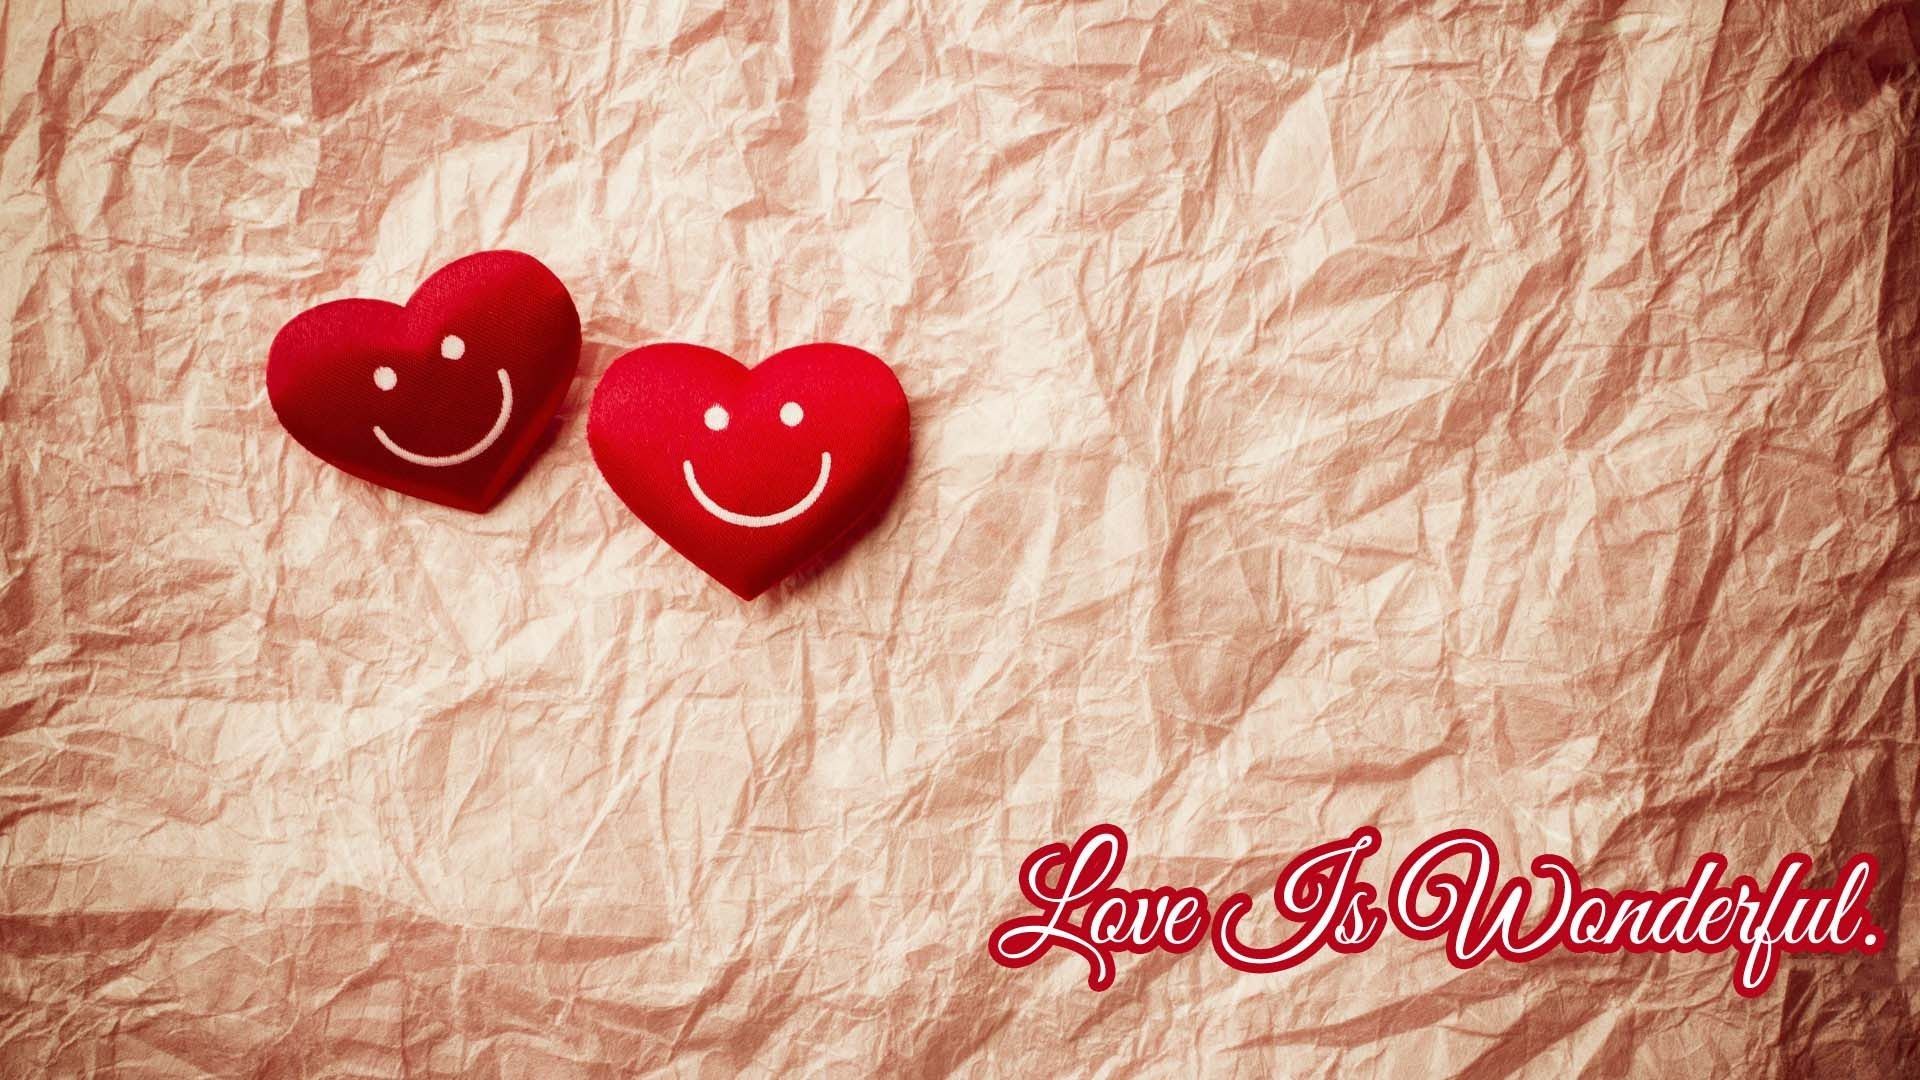 My Love Wallpapers